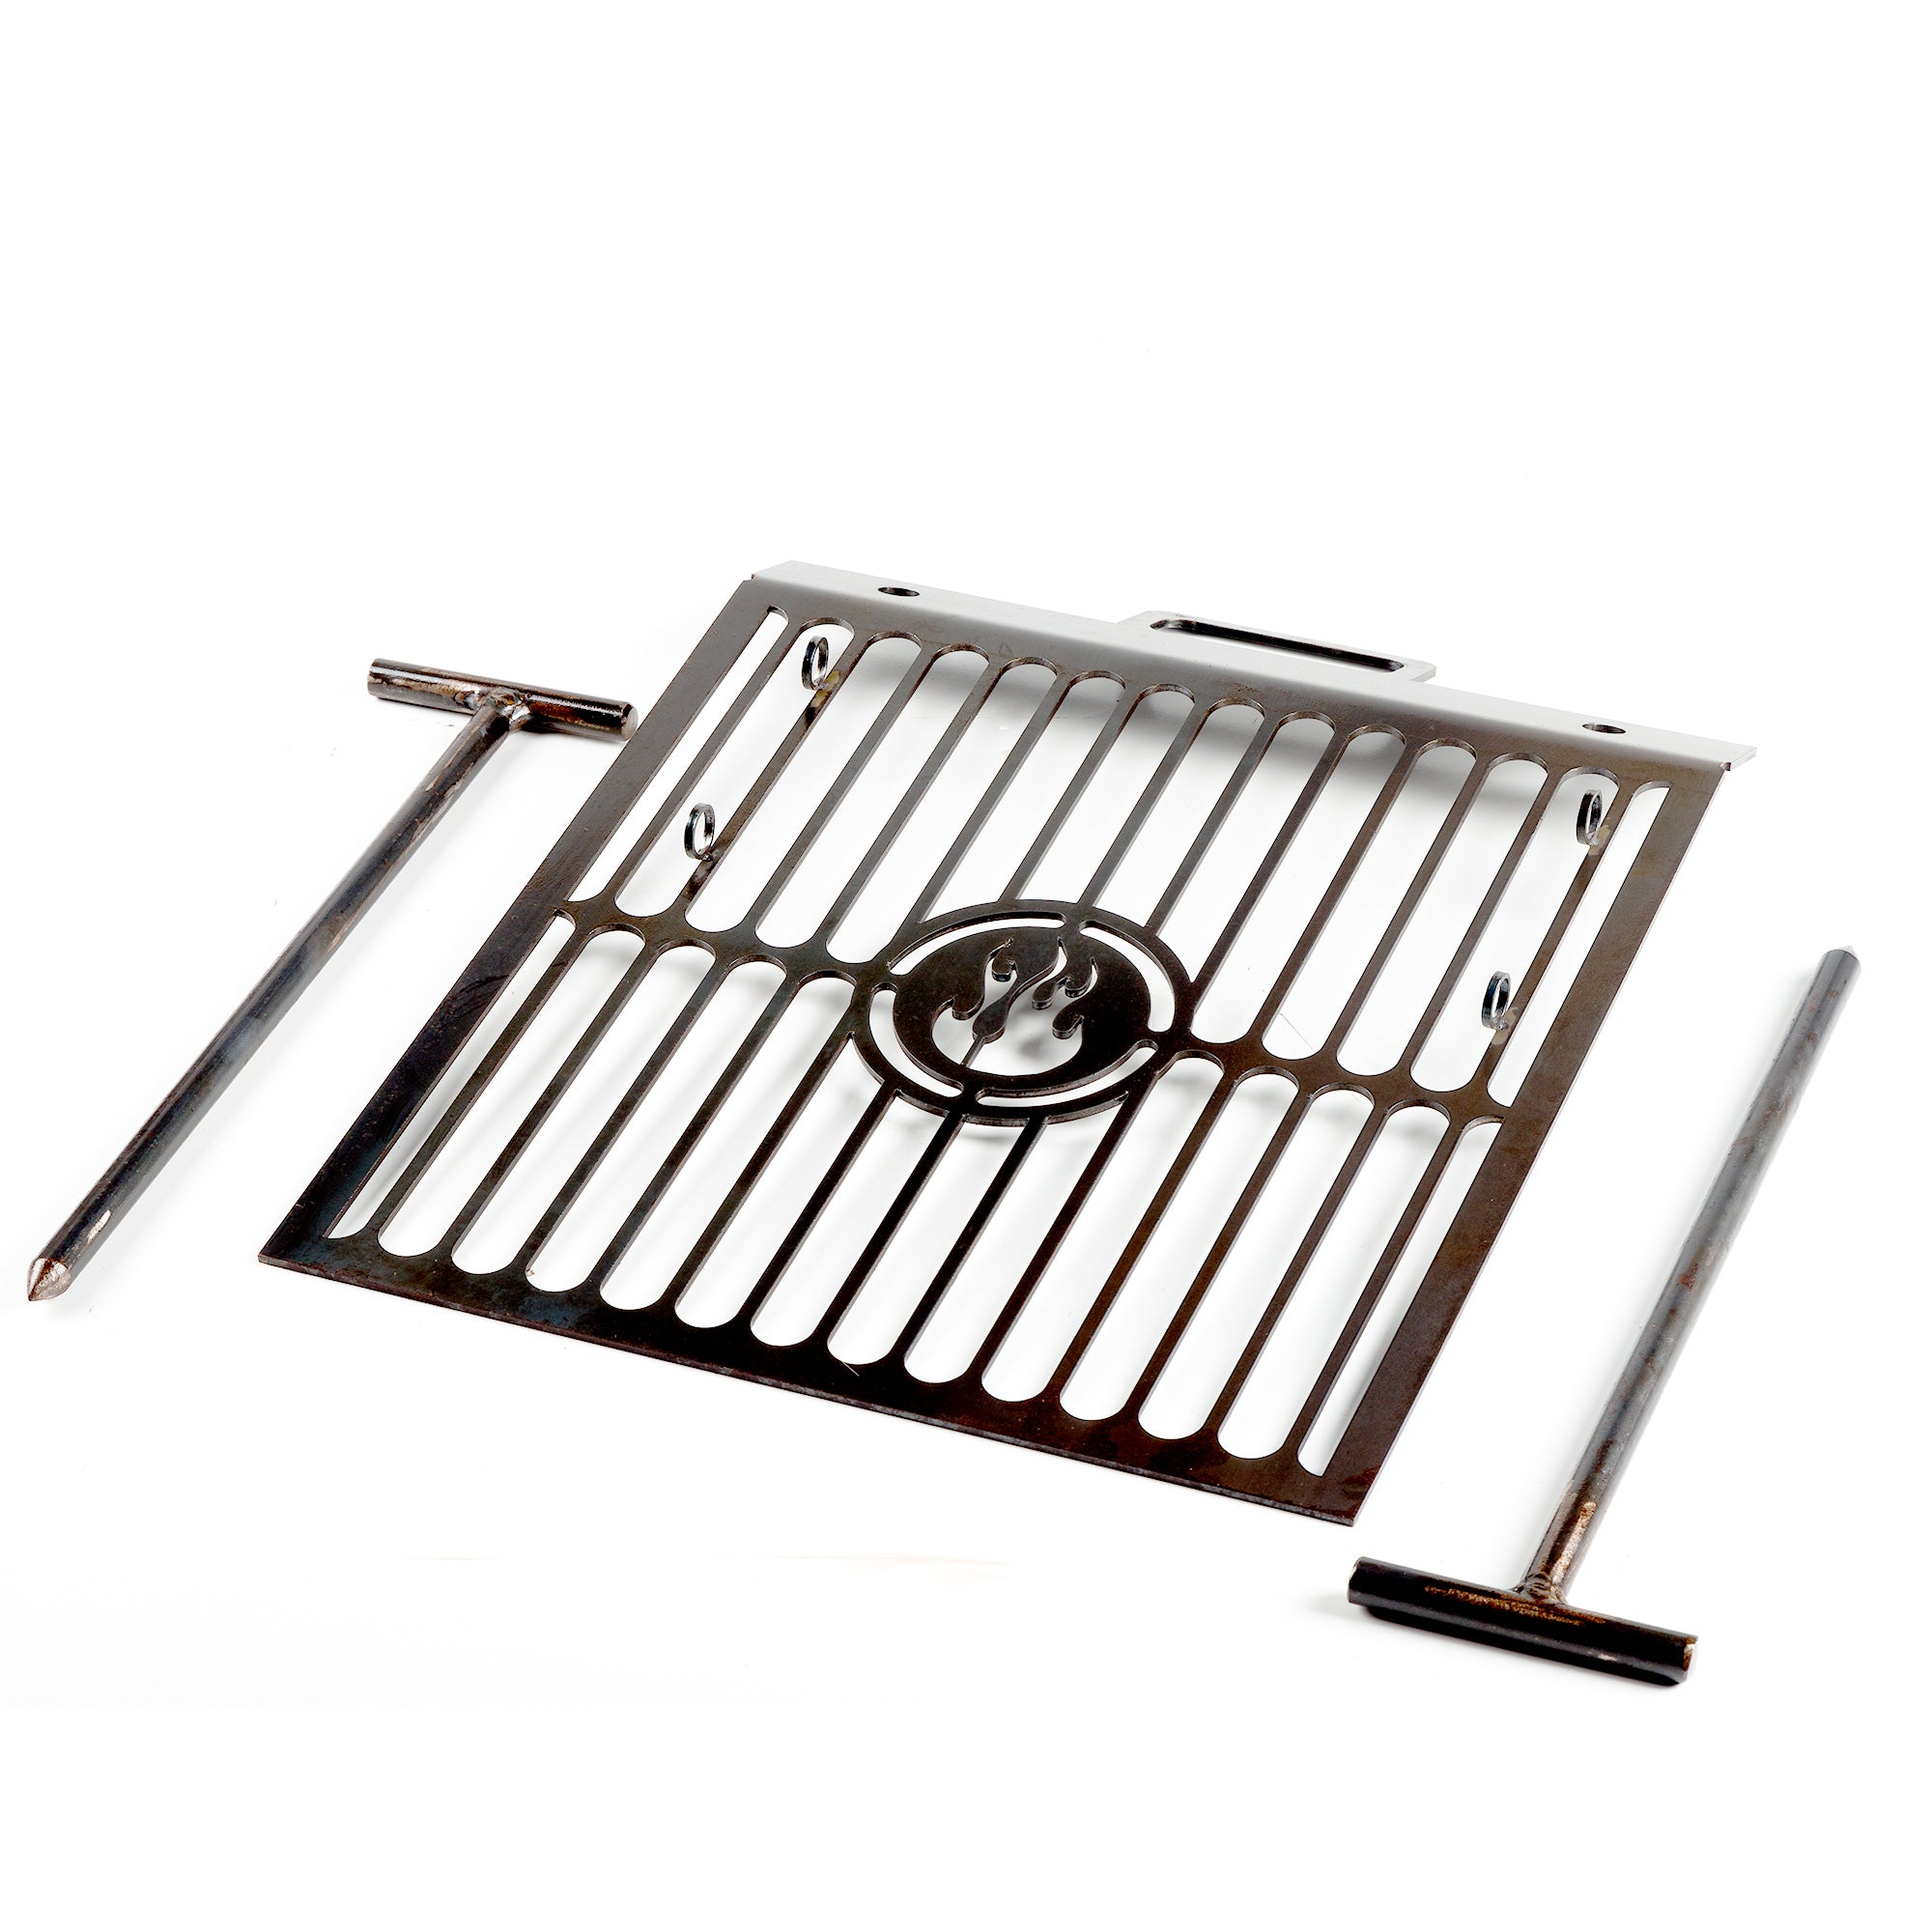 Camping Grill 36